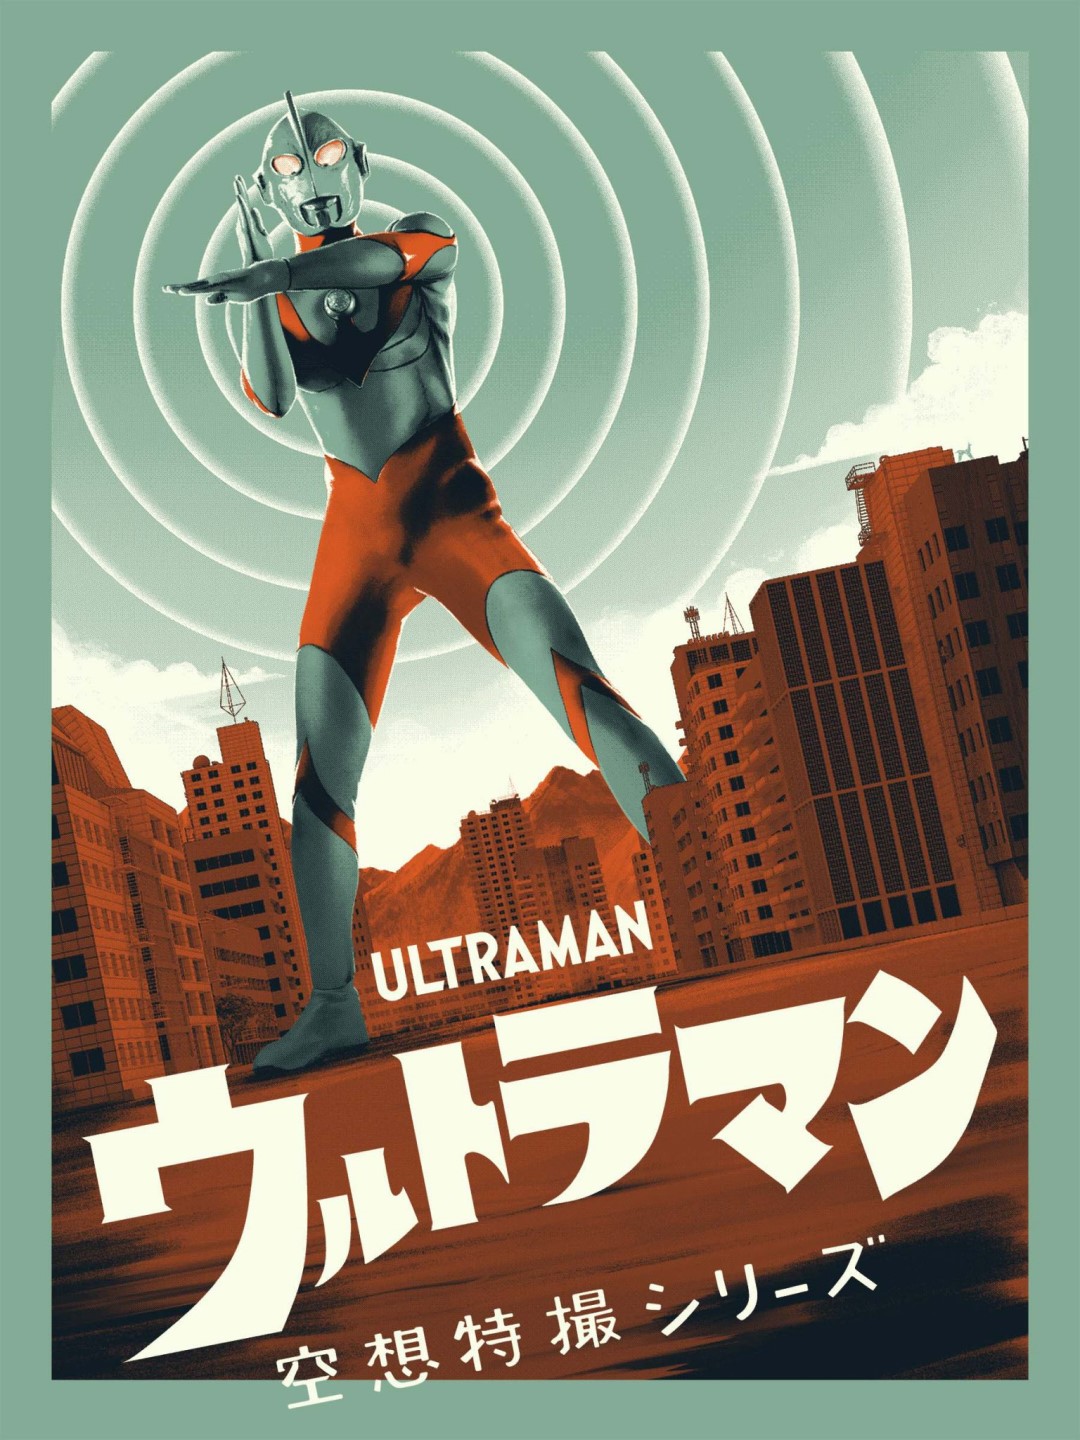 NEW NAKATOMI PRINT OFFERS A RETRO VISION OF THE GIANT OF LIGHT